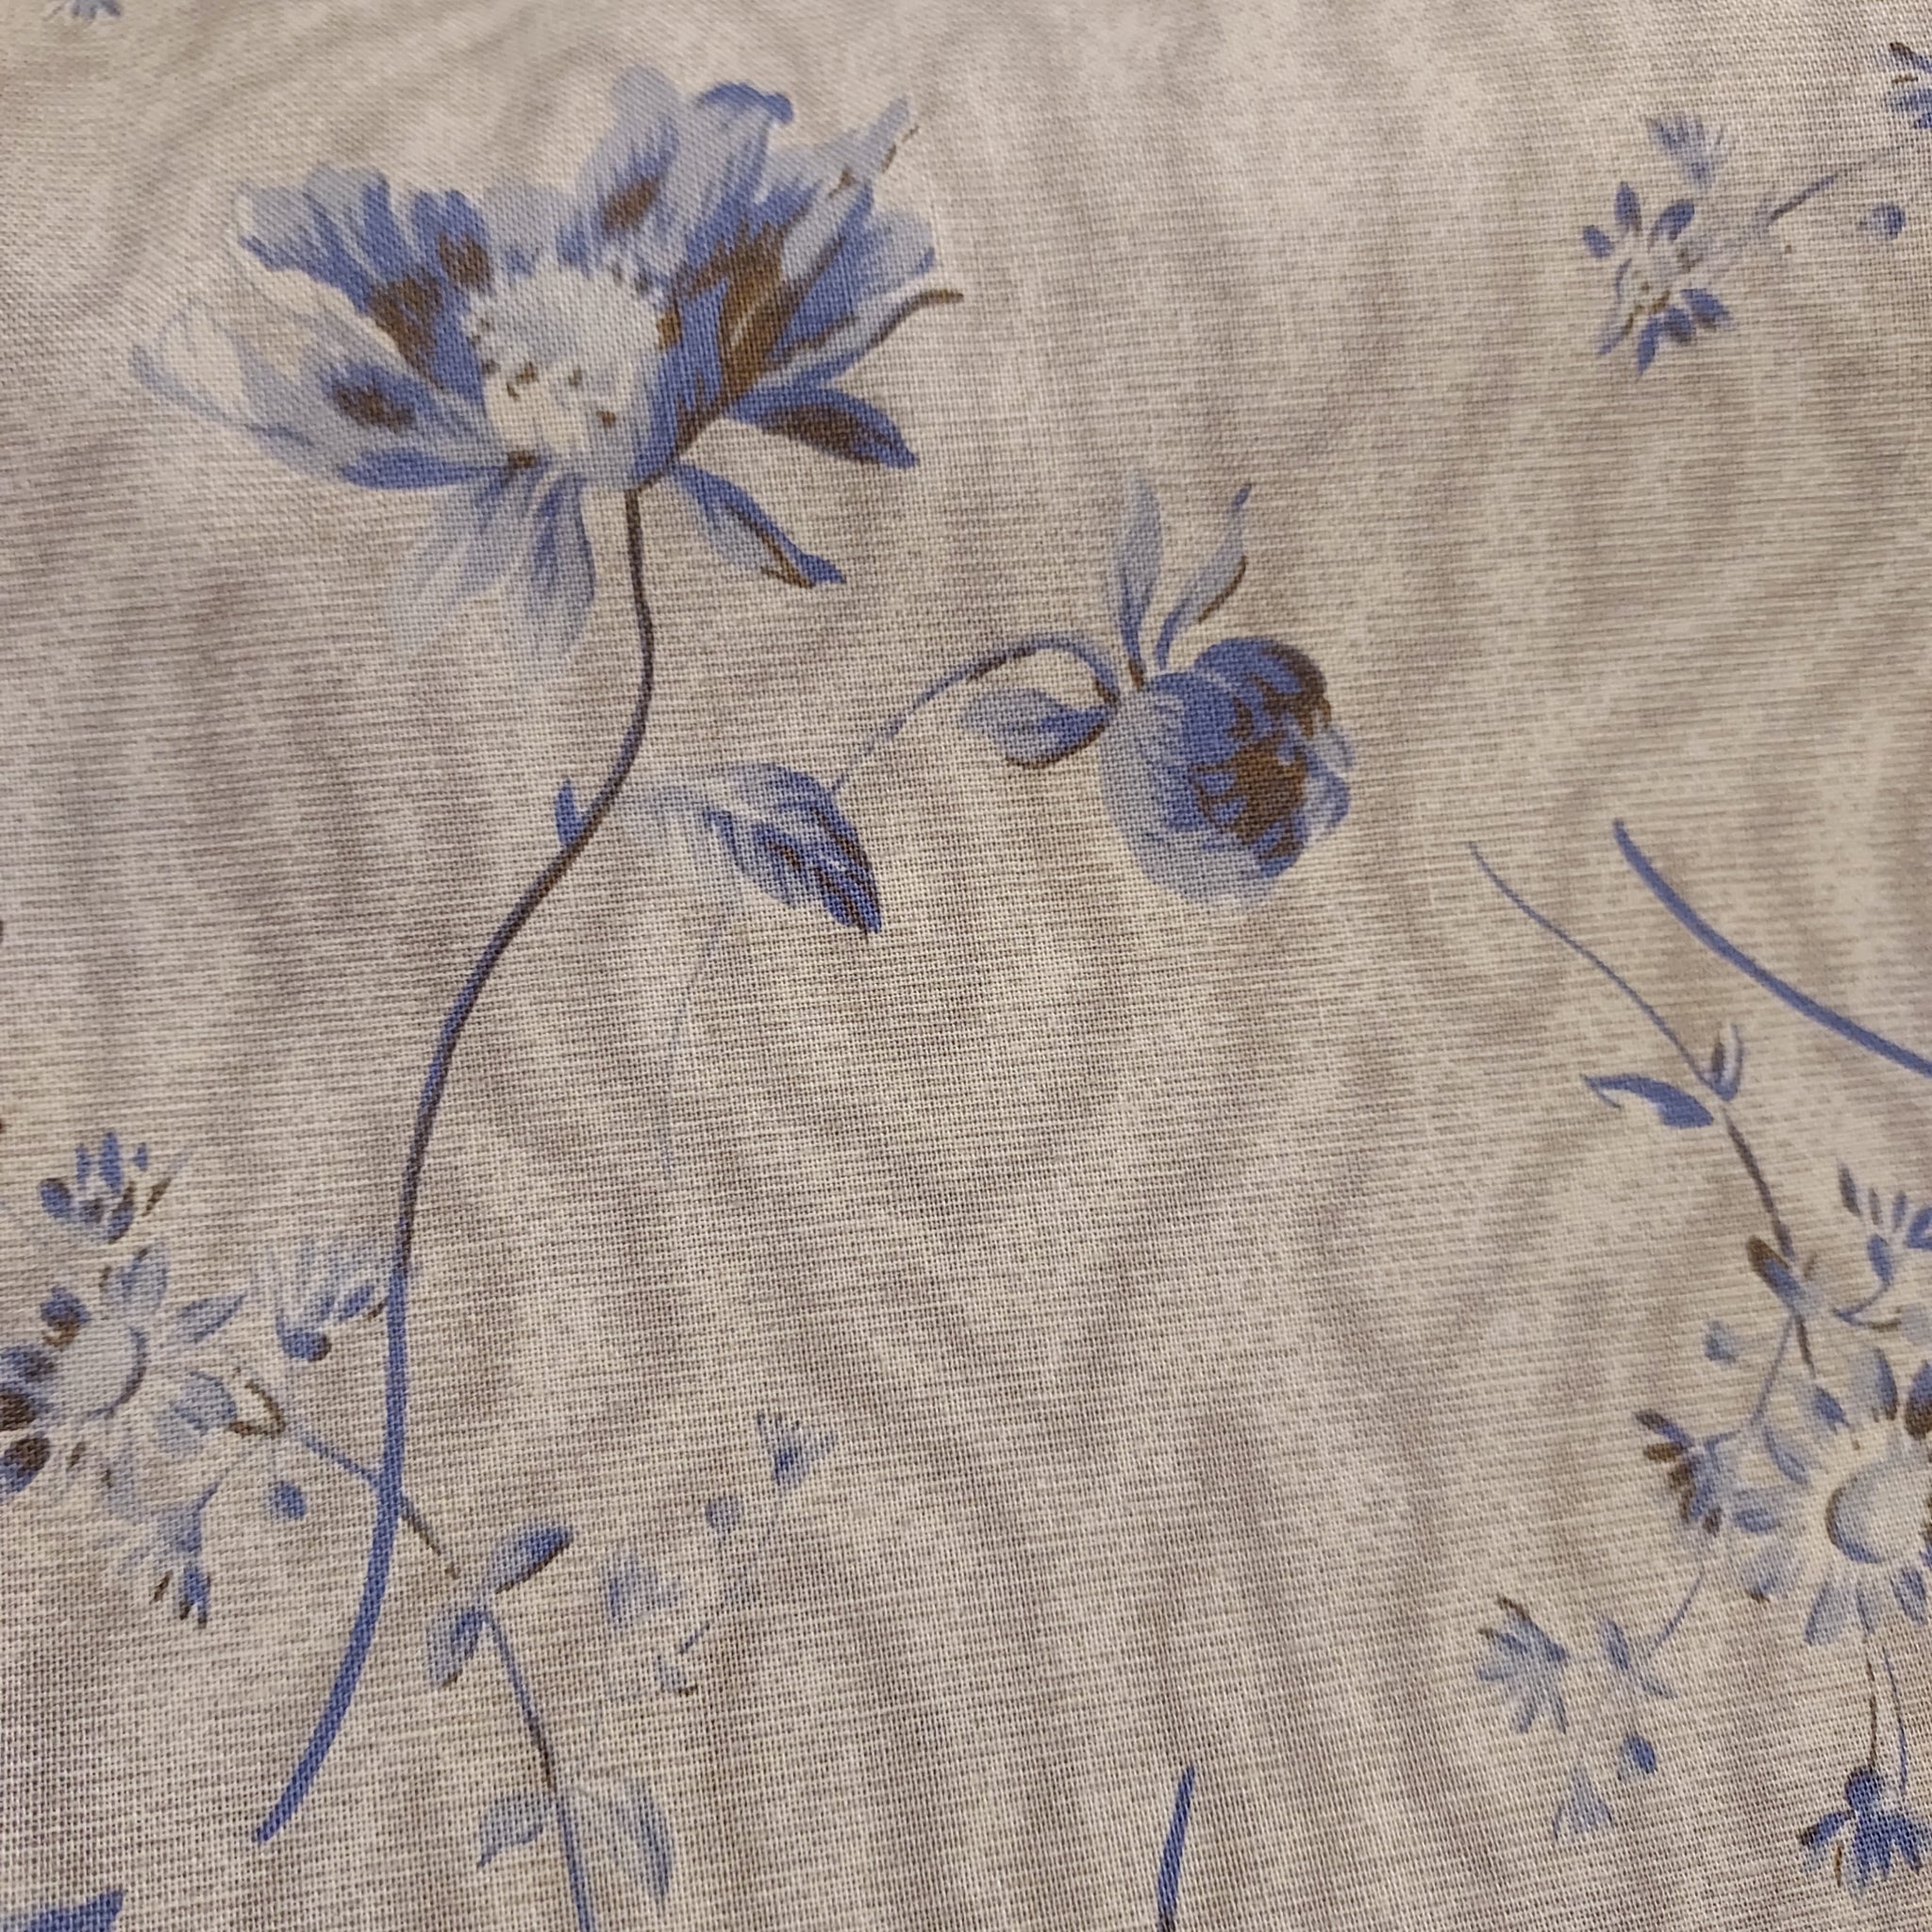  This beautiful cotton fabric is made in Japan. Super soft hand and lightweight feel, this fabric has big blue flowers on a tan background. This tan color has a little bit of a green tint to it. Beautiful fabric for clothing or quilting.